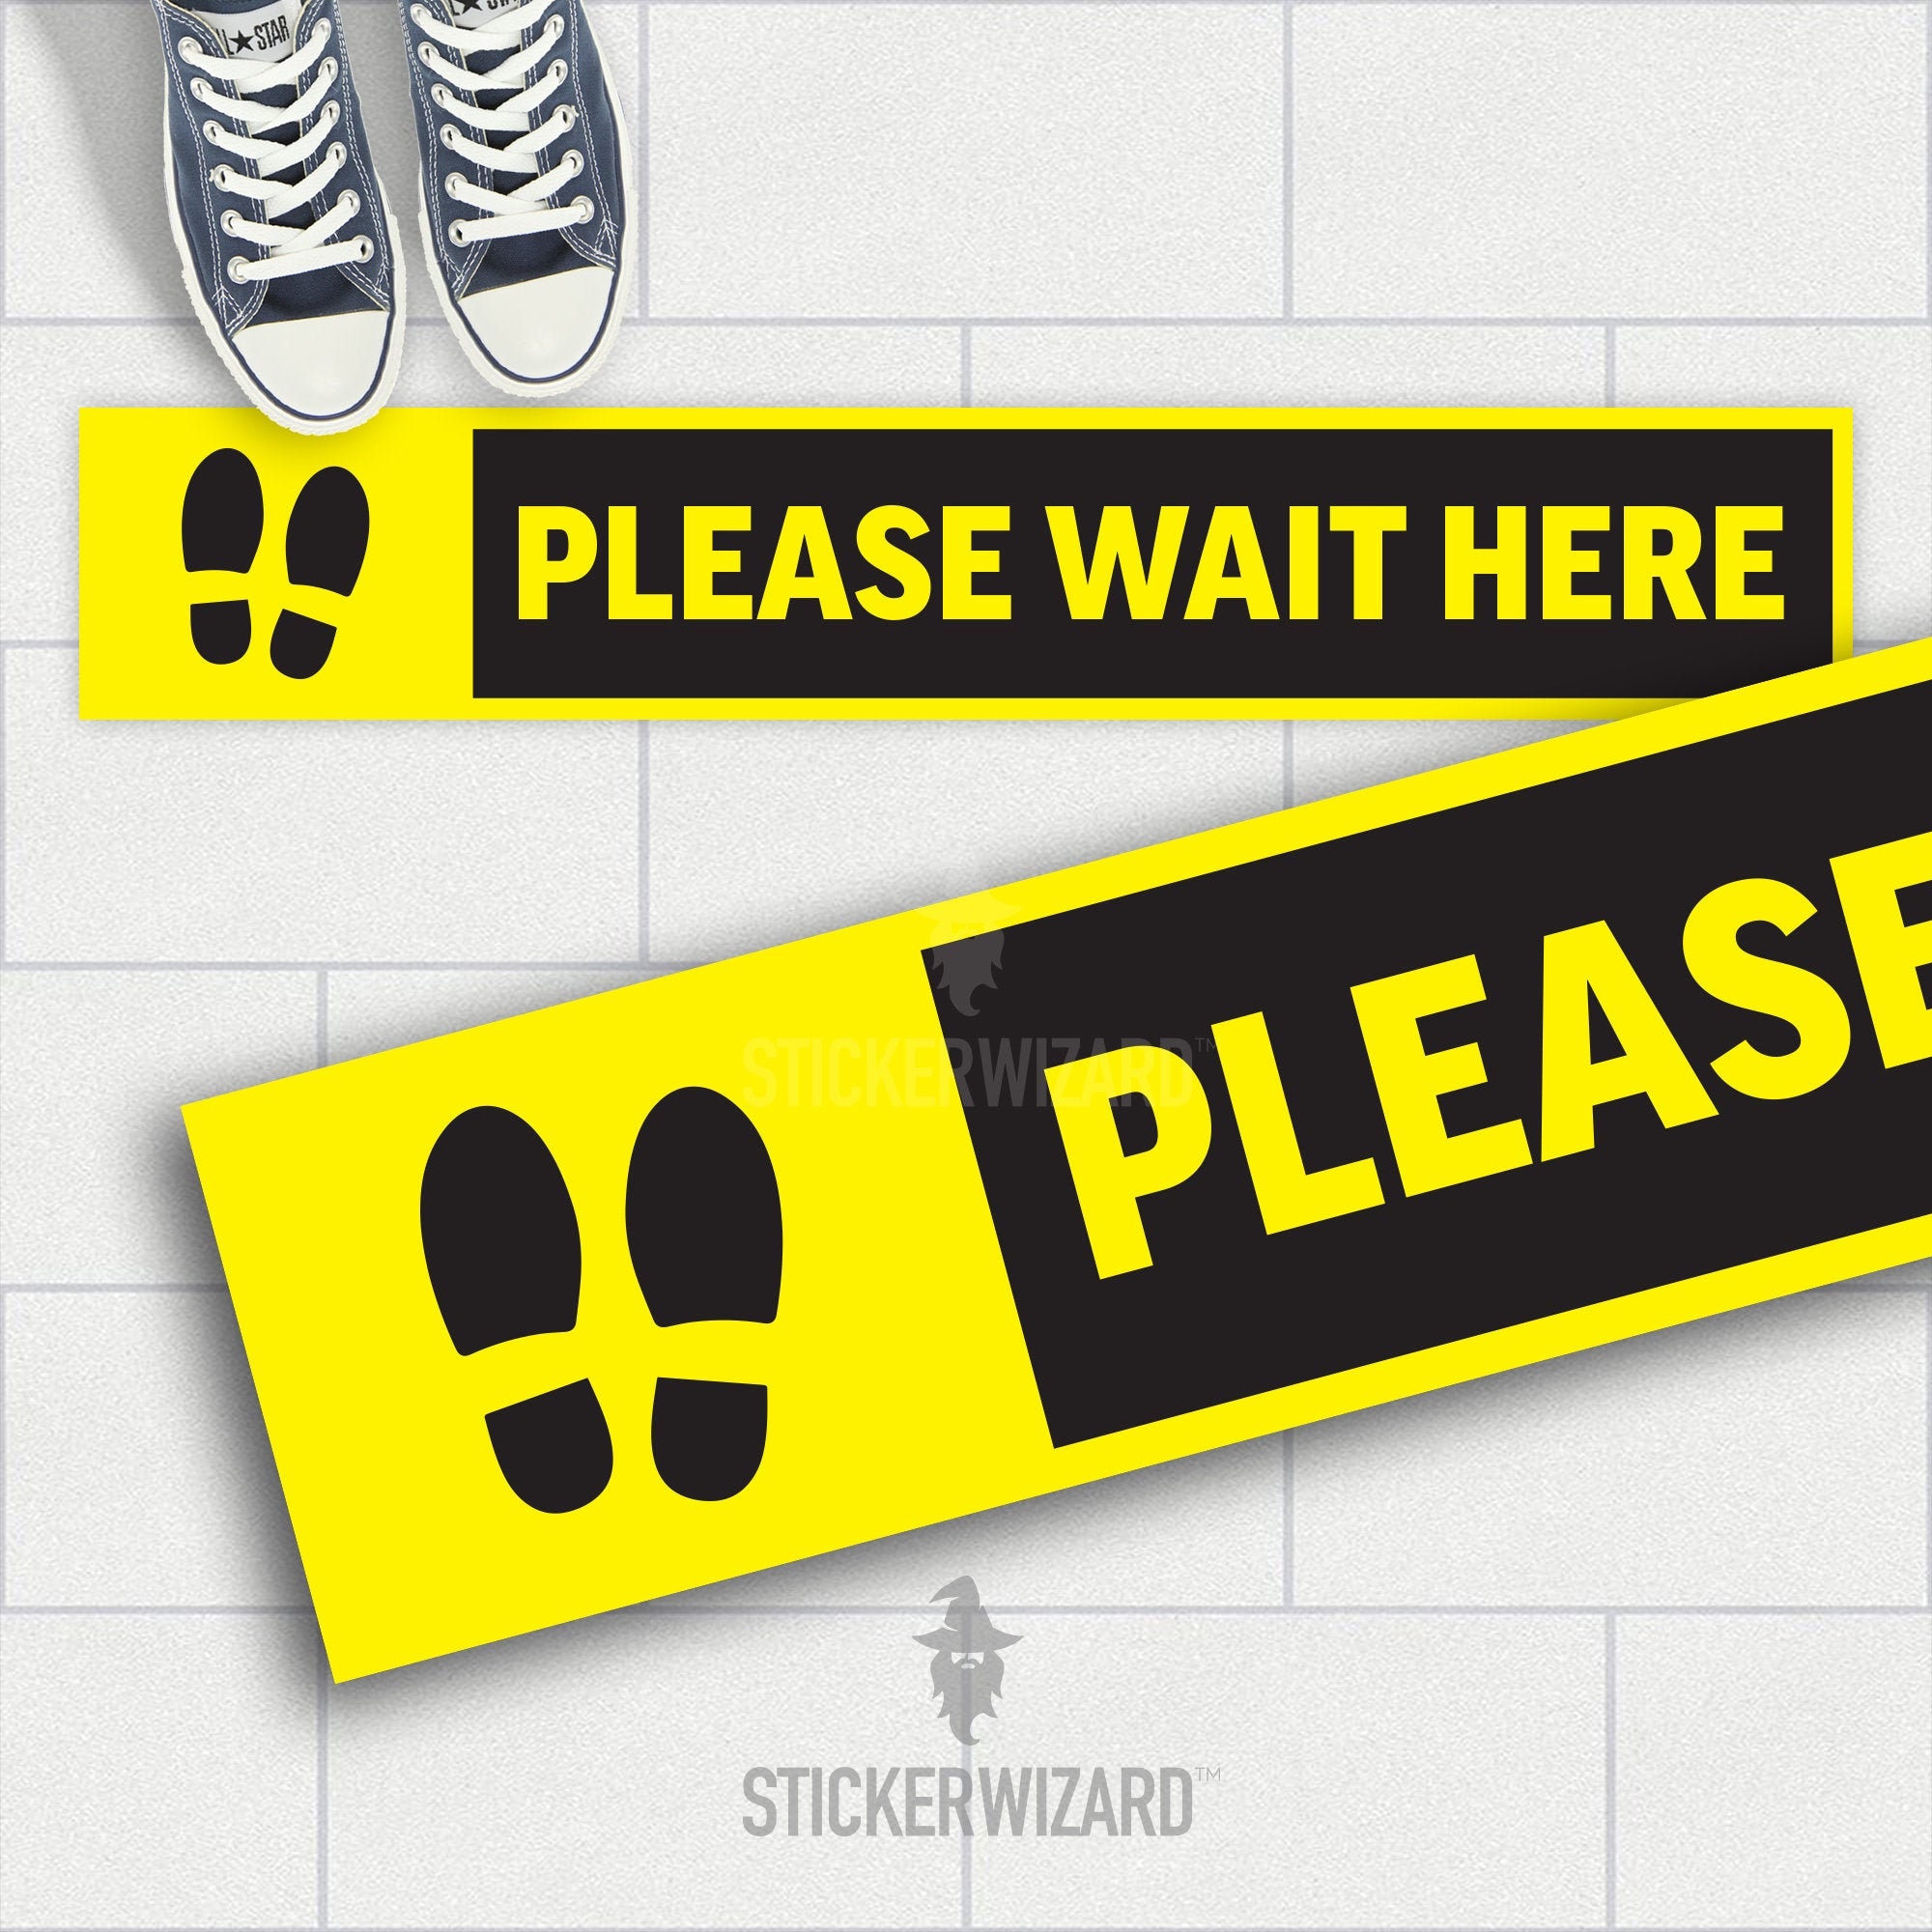 Stickers For Shop Floor Decals Self Adhesive Please Wait Here 